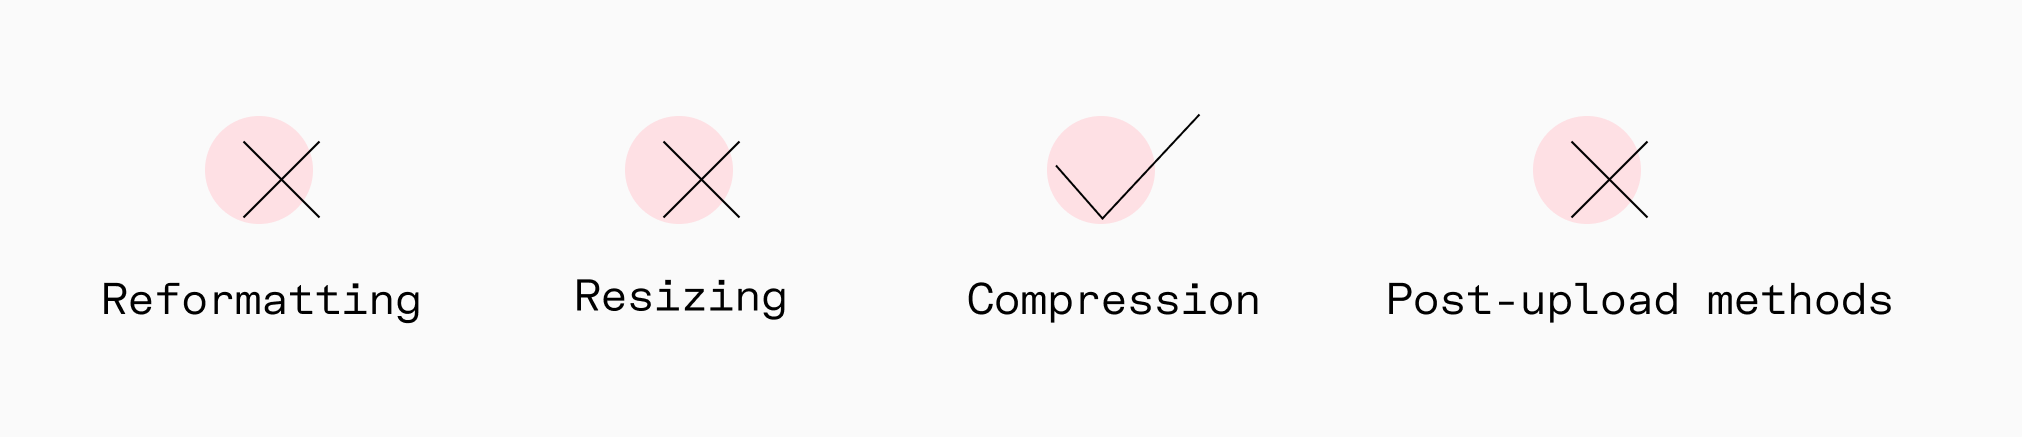 TinyPNG or Compressor tools usually manage only image compression